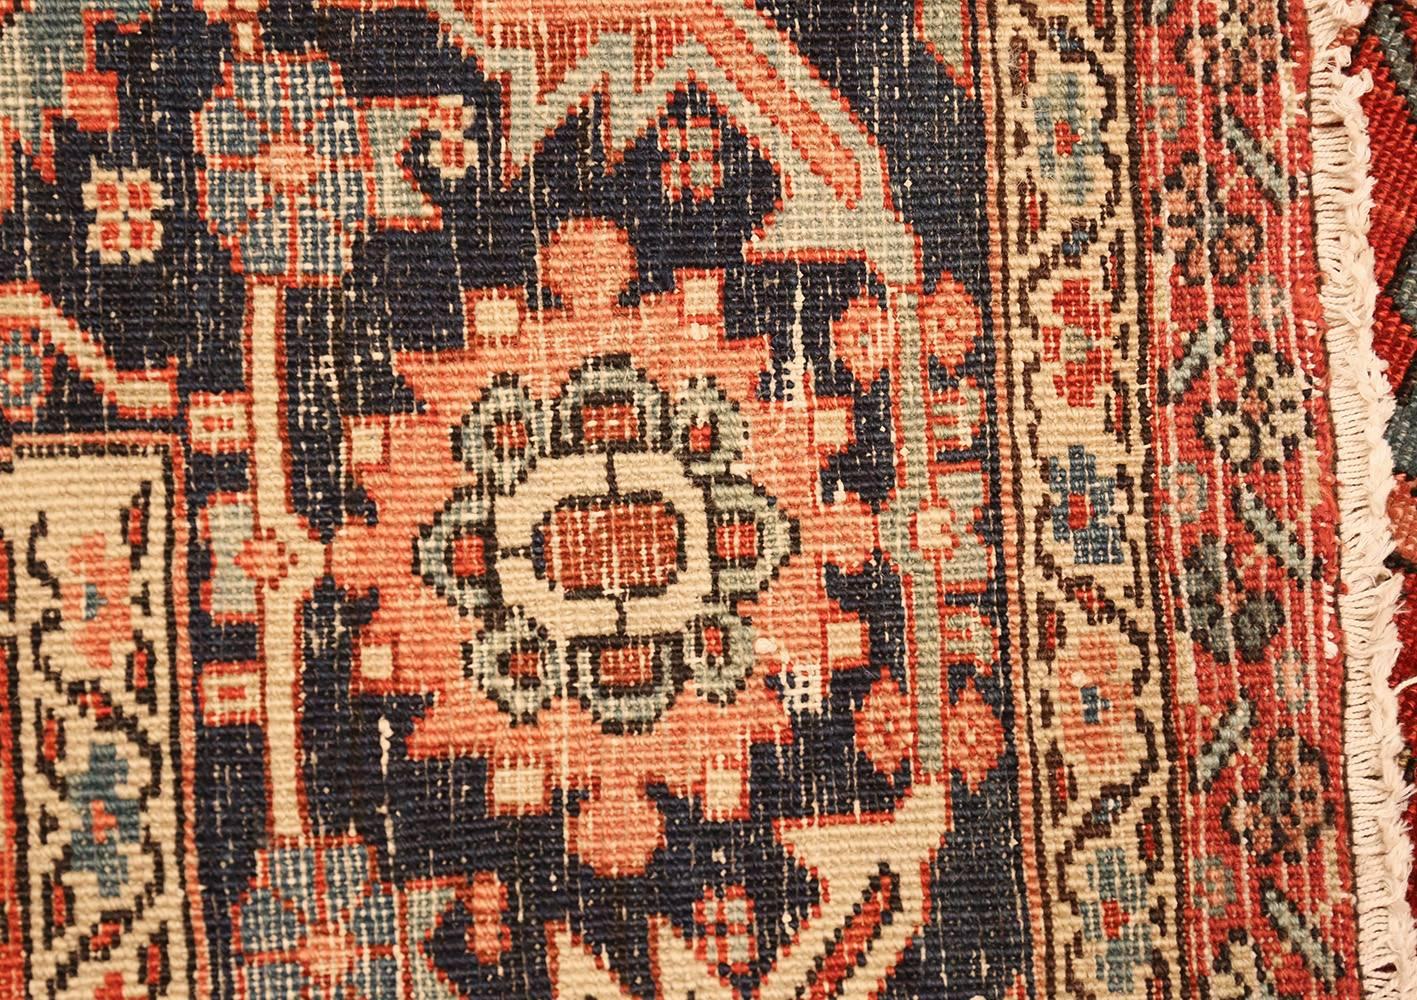 20th Century Antique Serapi Persian Rug. Size: 10 ft 4 in x 13 ft 6 in (3.15 m x 4.11 m)